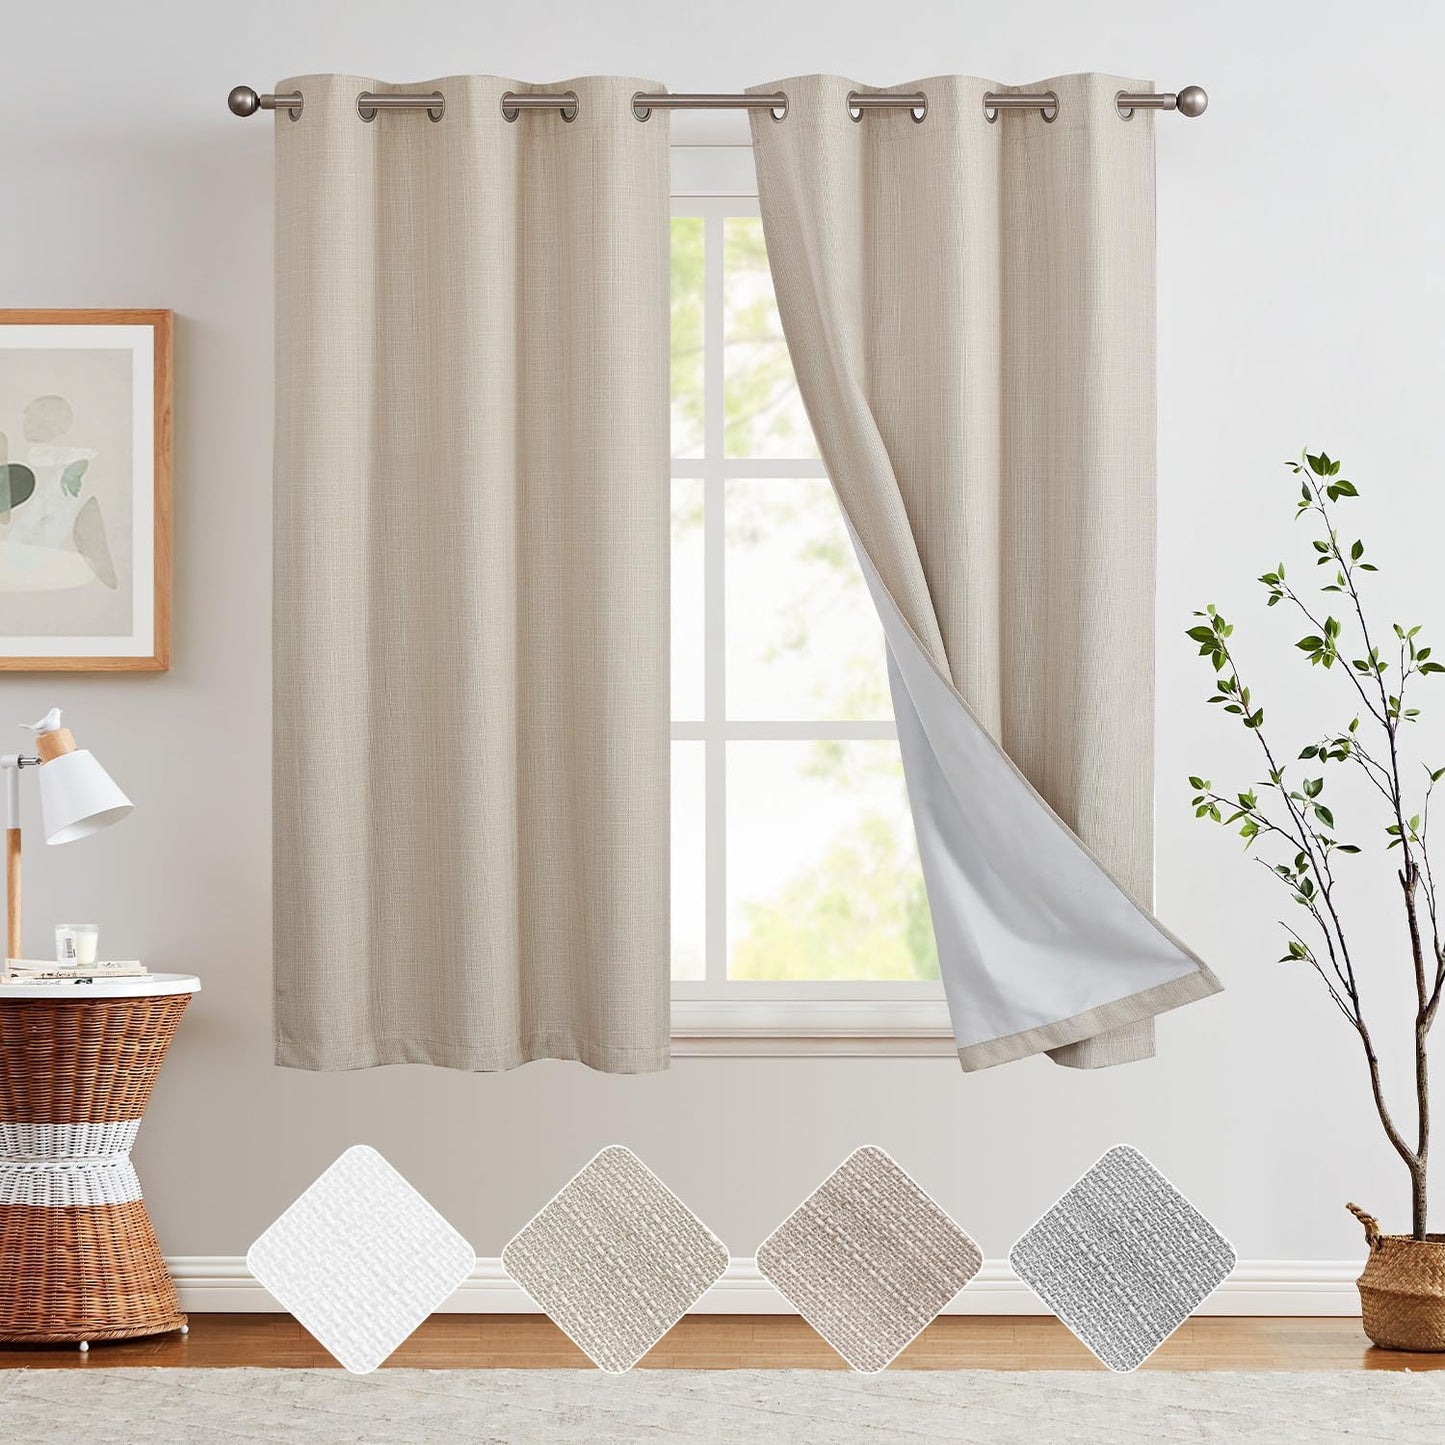 COLLACT White Linen Textured Curtains 84 Inch Length 2 Panels for Living Room Casual Weave Light Filtering Semi Sheer Curtains & Drapes for Bedroom Grommet Top Window Treatments, W38 X L84, White  COLLACT Blackout | Heathered Beige W38 X L63 